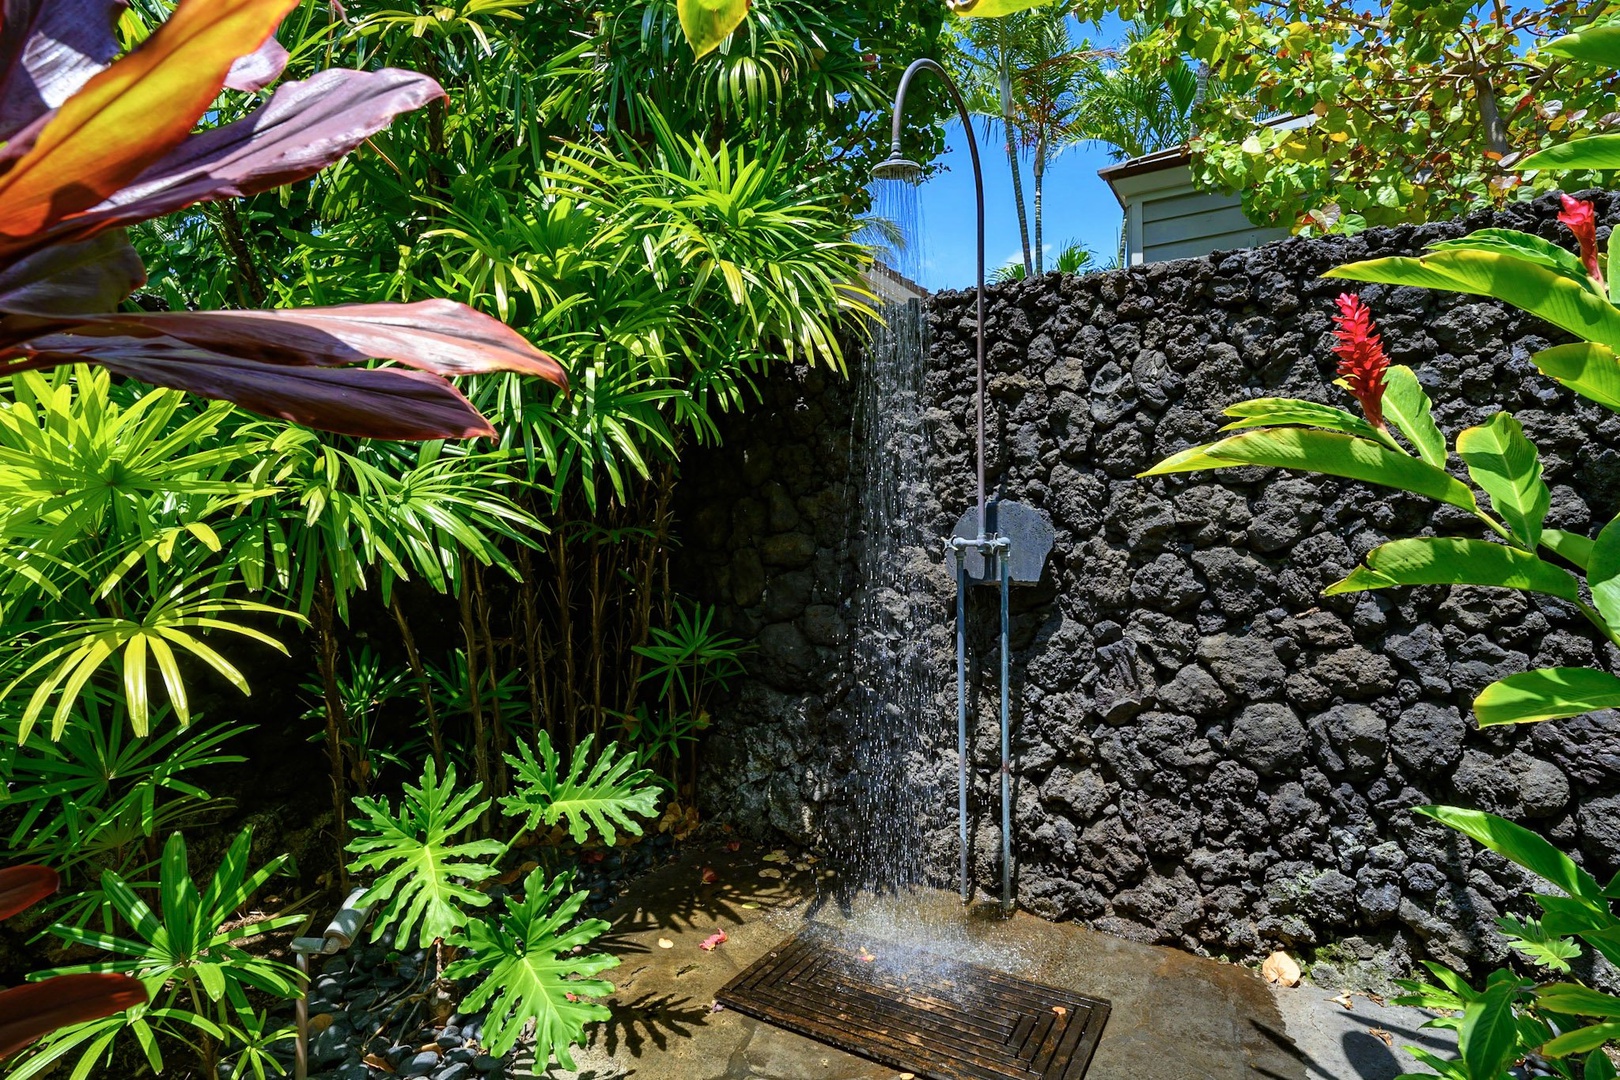 Kamuela Vacation Rentals, 3BD Na Hale 3 at Pauoa Beach Club at Mauna Lani Resort - A unique feature is the private access to a lava rock wall outdoor shower, adding a touch of island charm.